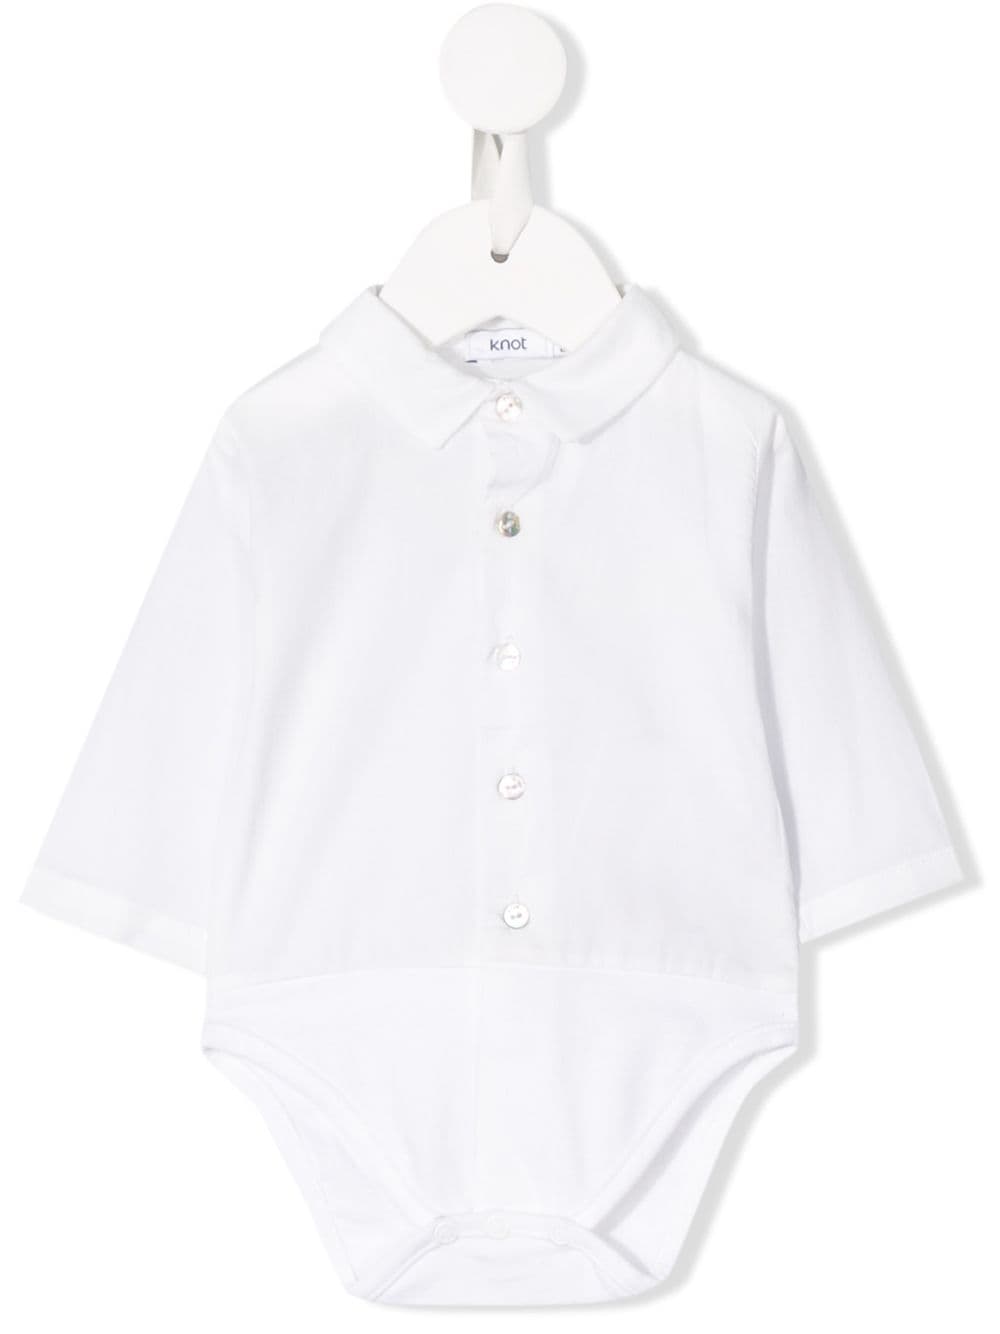 Knot fitted shirt body - White von Knot